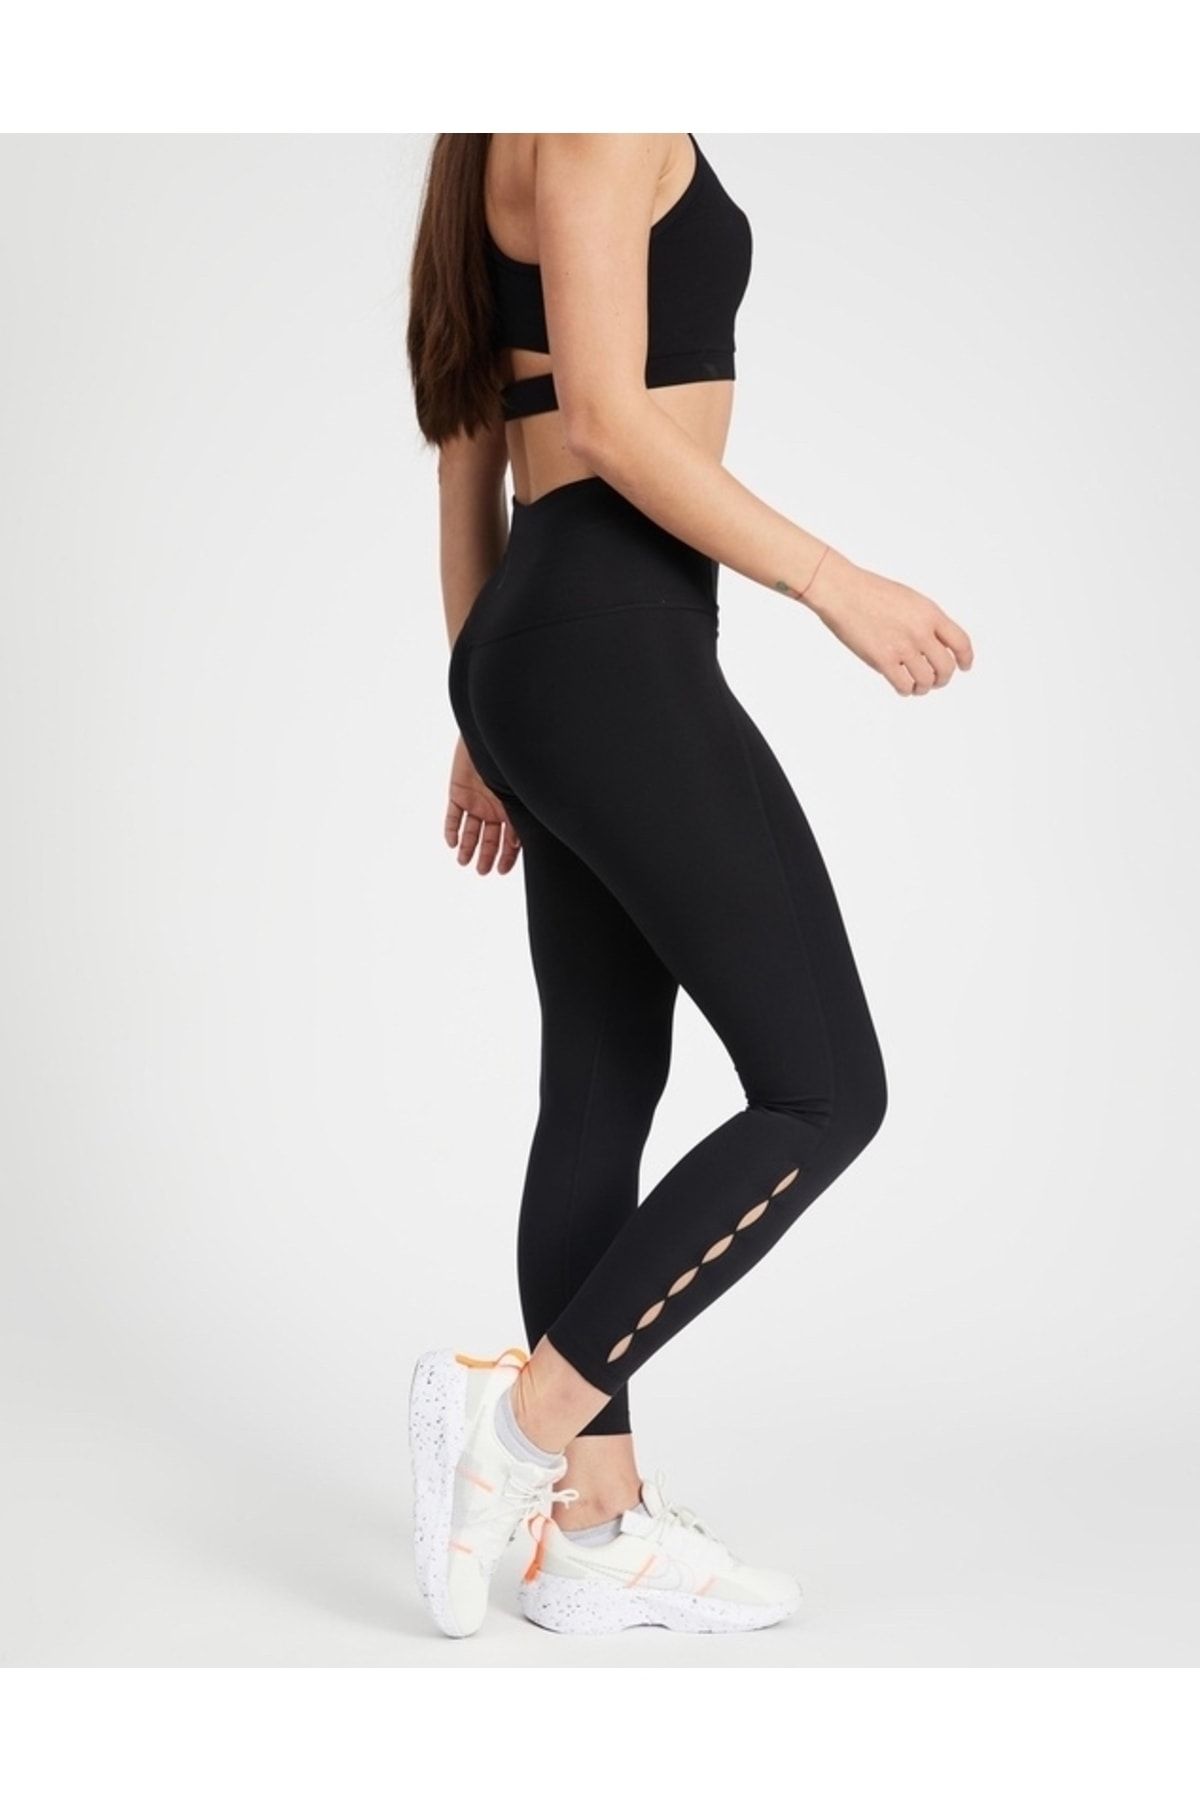 Nike Power Sculpt Hyper Tight Fit 7/8 High Waisted Sculpting Black Sports  Tights - Trendyol